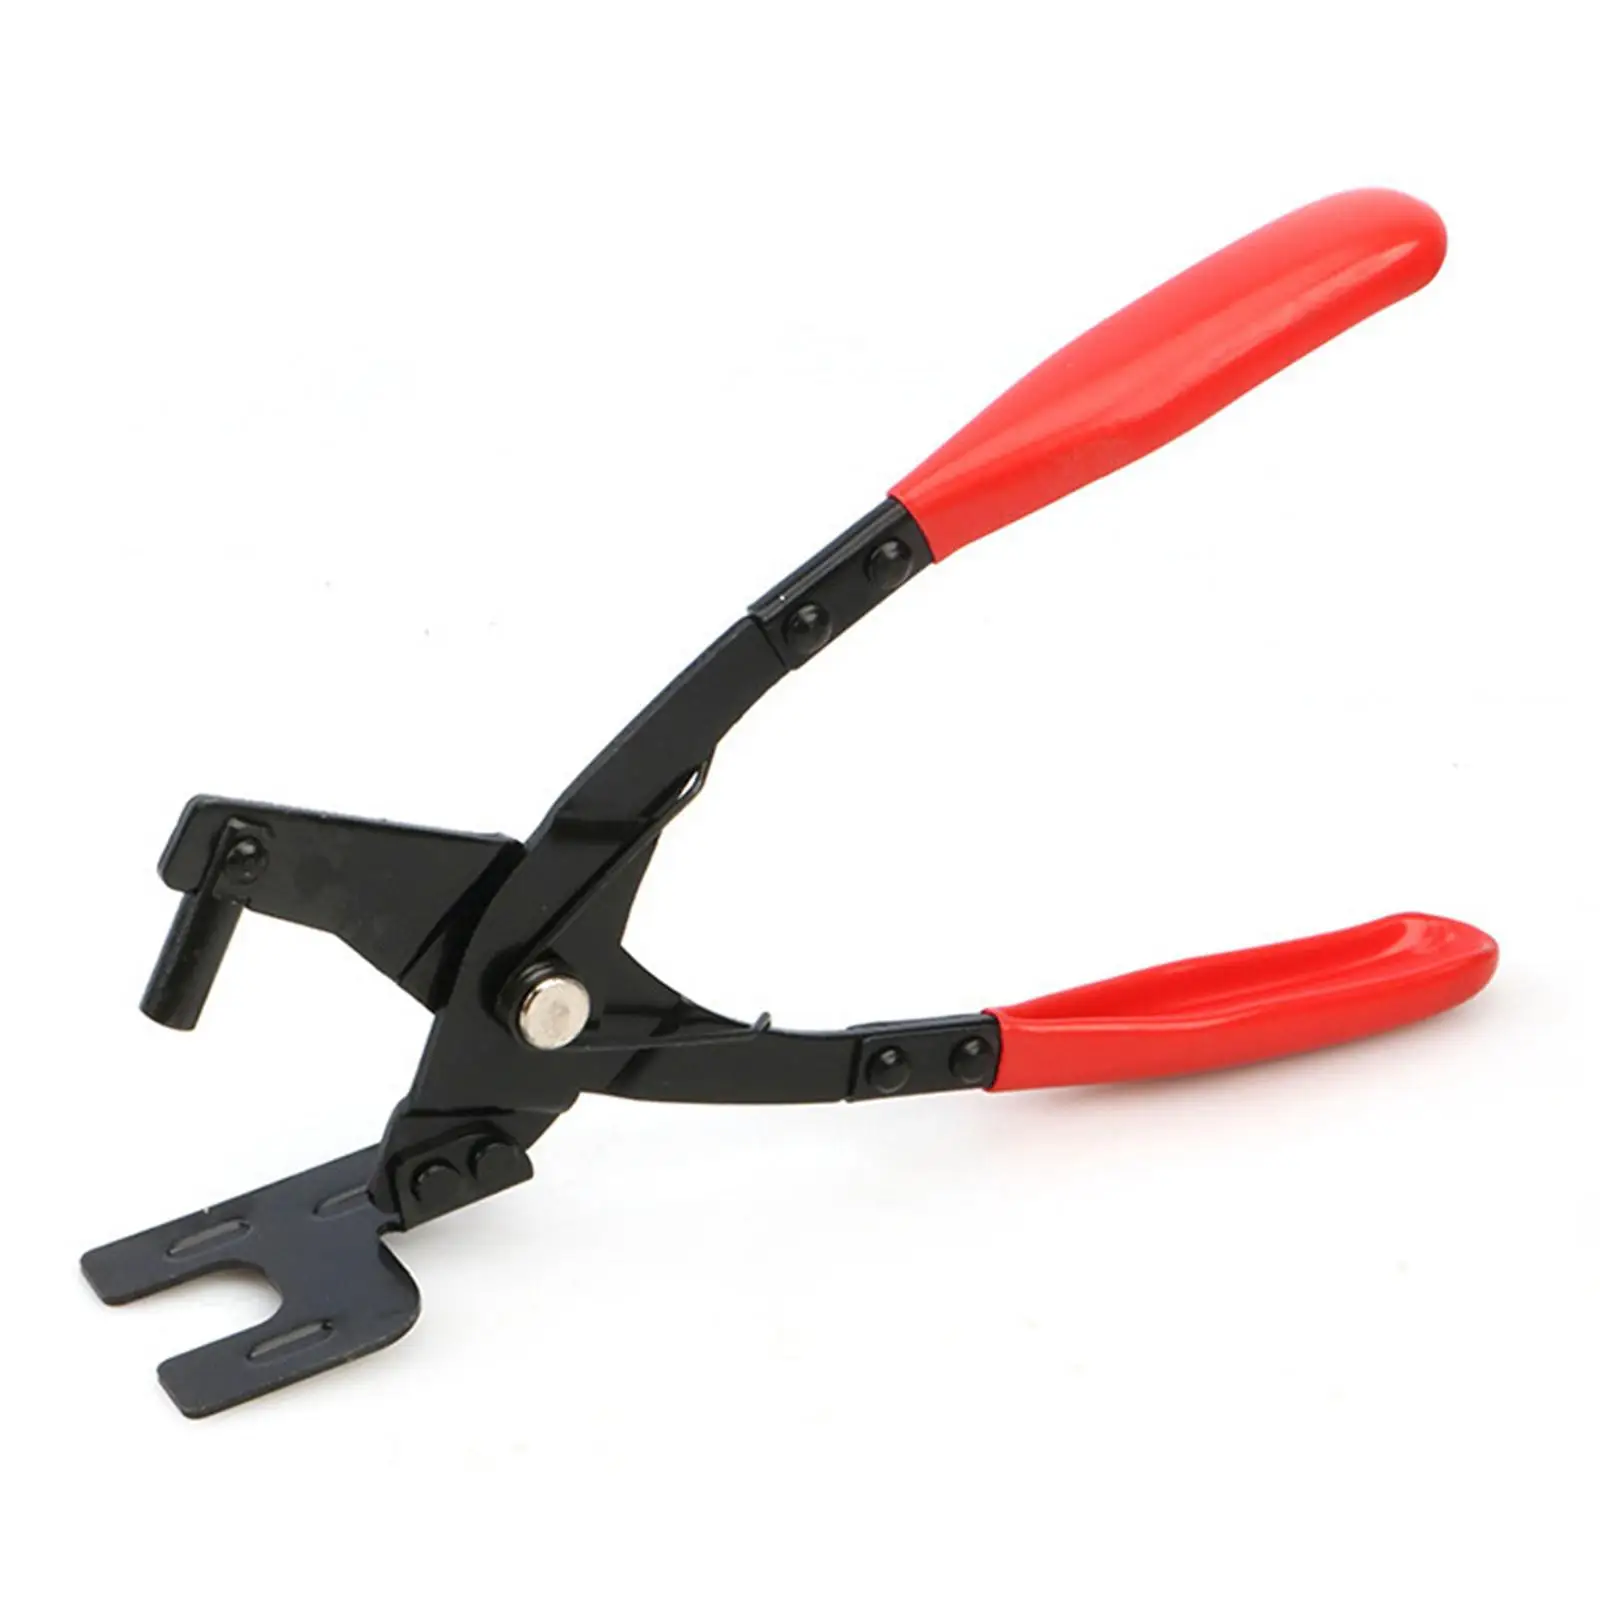 Exhaust Hanger Removal Pliers Hand Operated Tools Anti Slip Muffler Hanger Removal Tool for Access in Hard to Reach Places Red